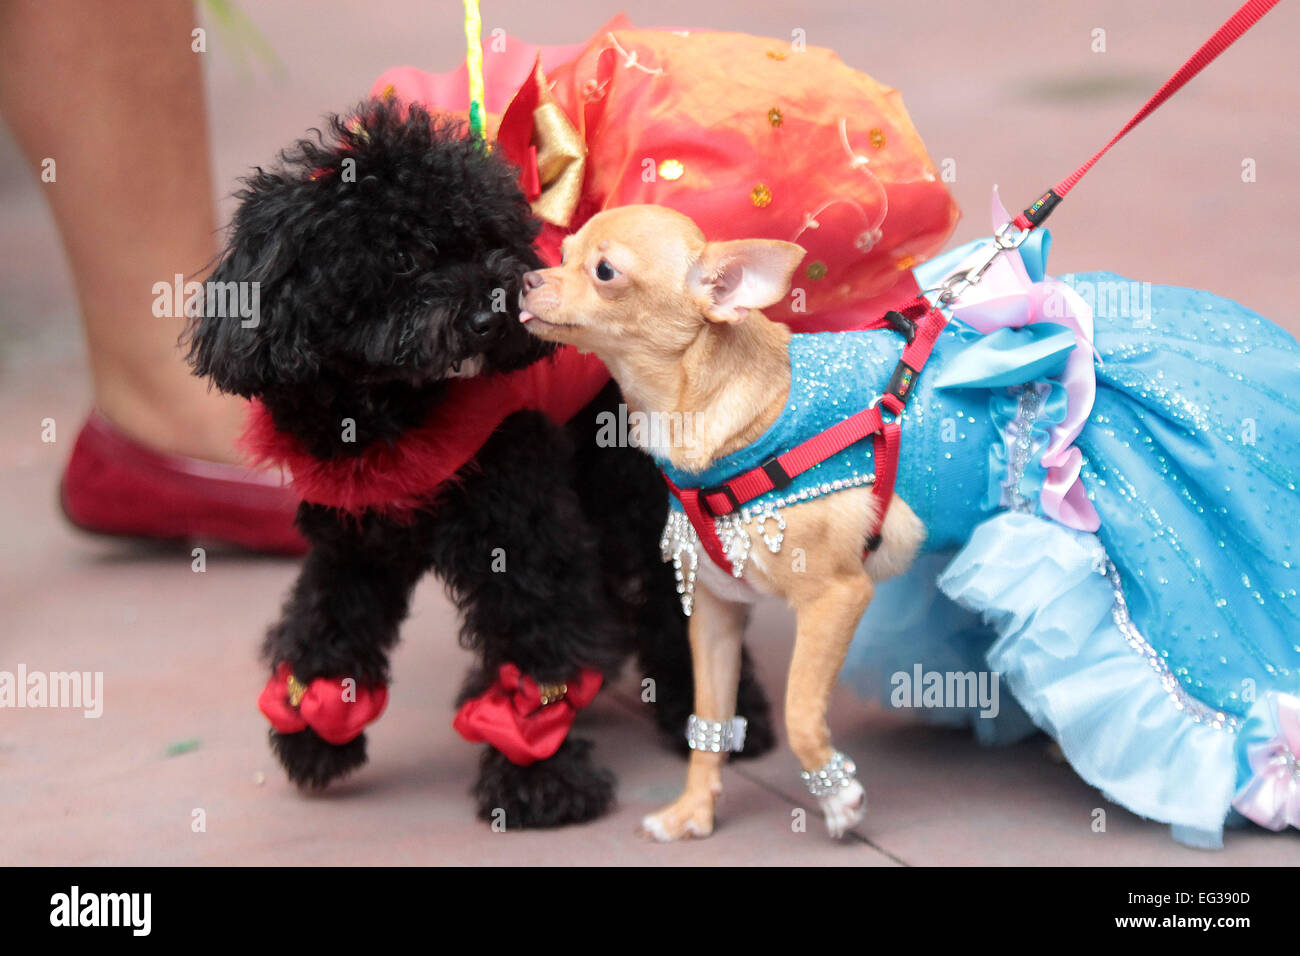 PHOTOS: Canine Promenade 2013 - 3rd Annual Dog Costume Contest and